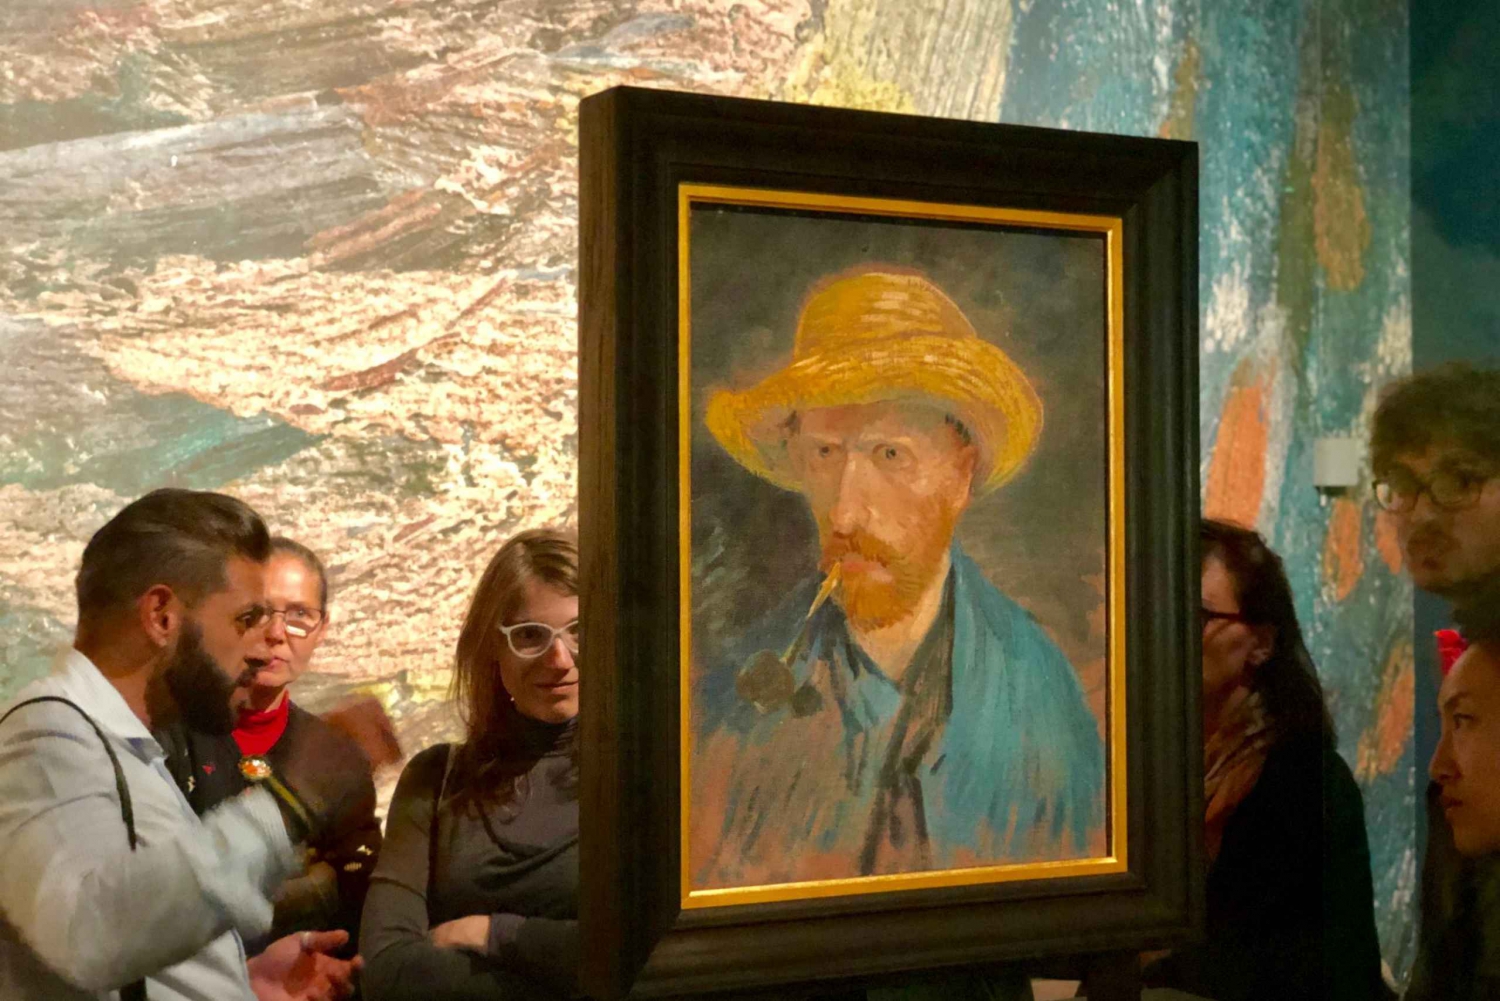 Van Gogh Museum & Rijksmuseum: Timed Entrance & Guided Tour